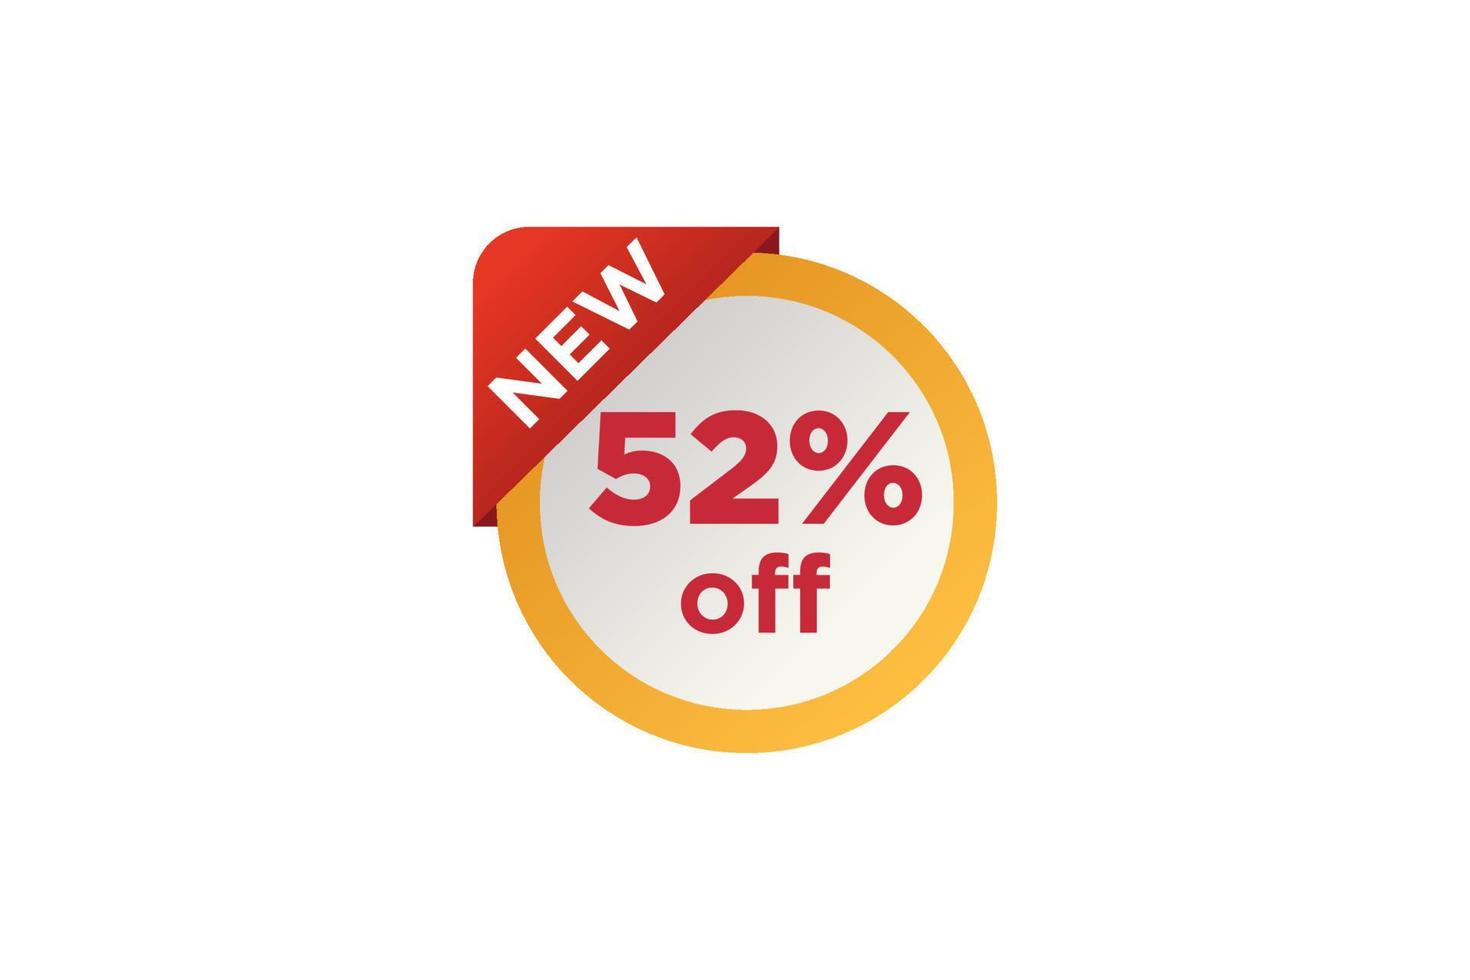 52 discount, Sales Vector badges for Labels, , Stickers, Banners, Tags, Web Stickers, New offer. Discount origami sign banner.